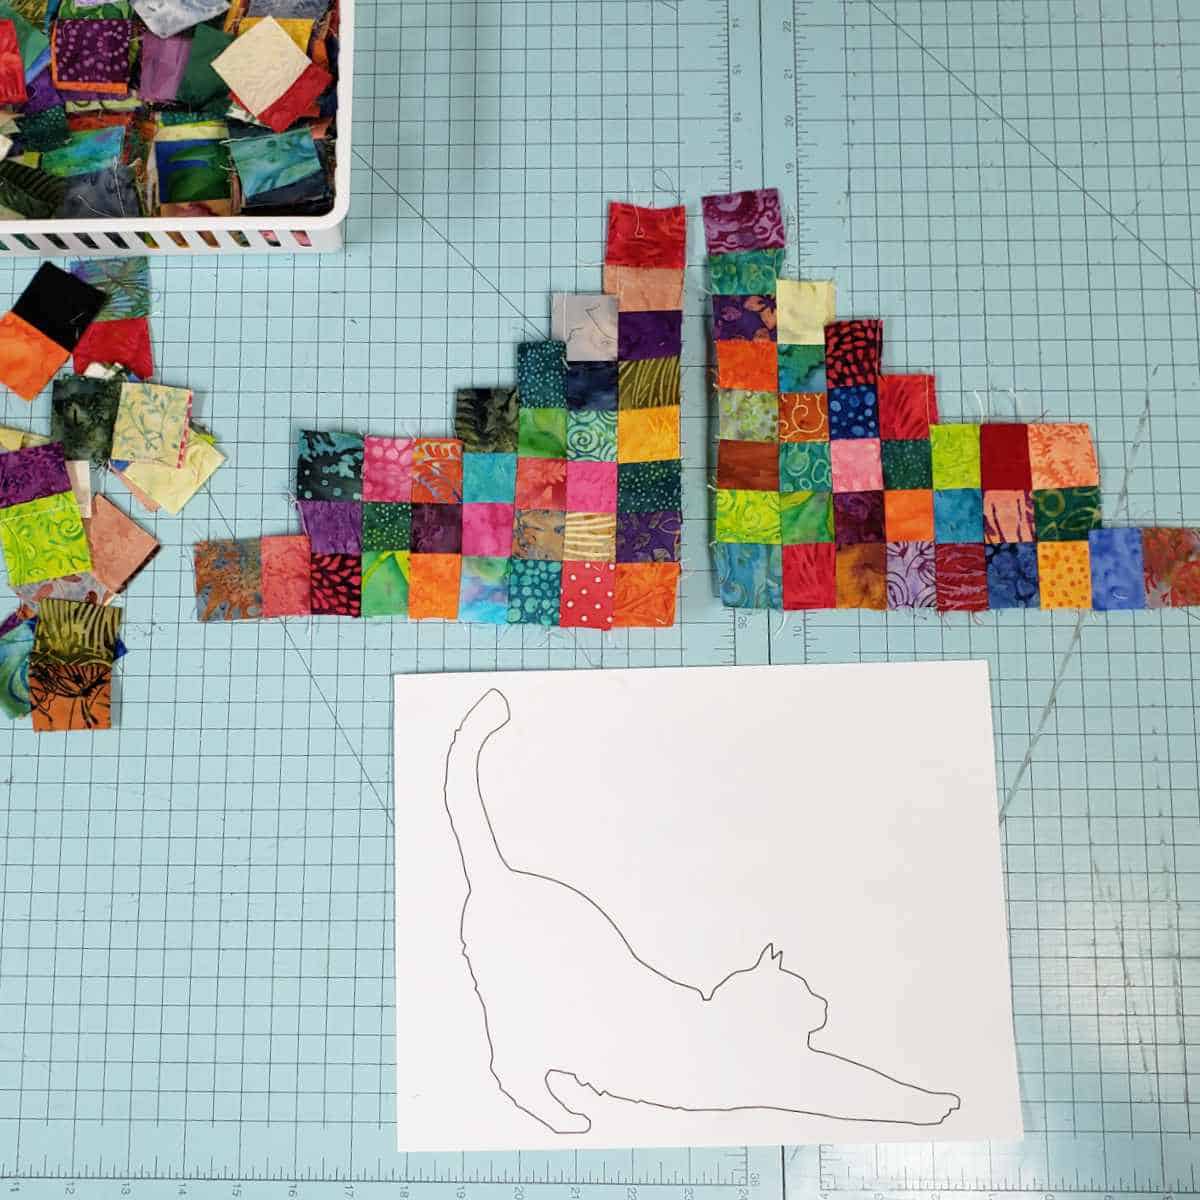 Laying out the squares to cover the cat applique